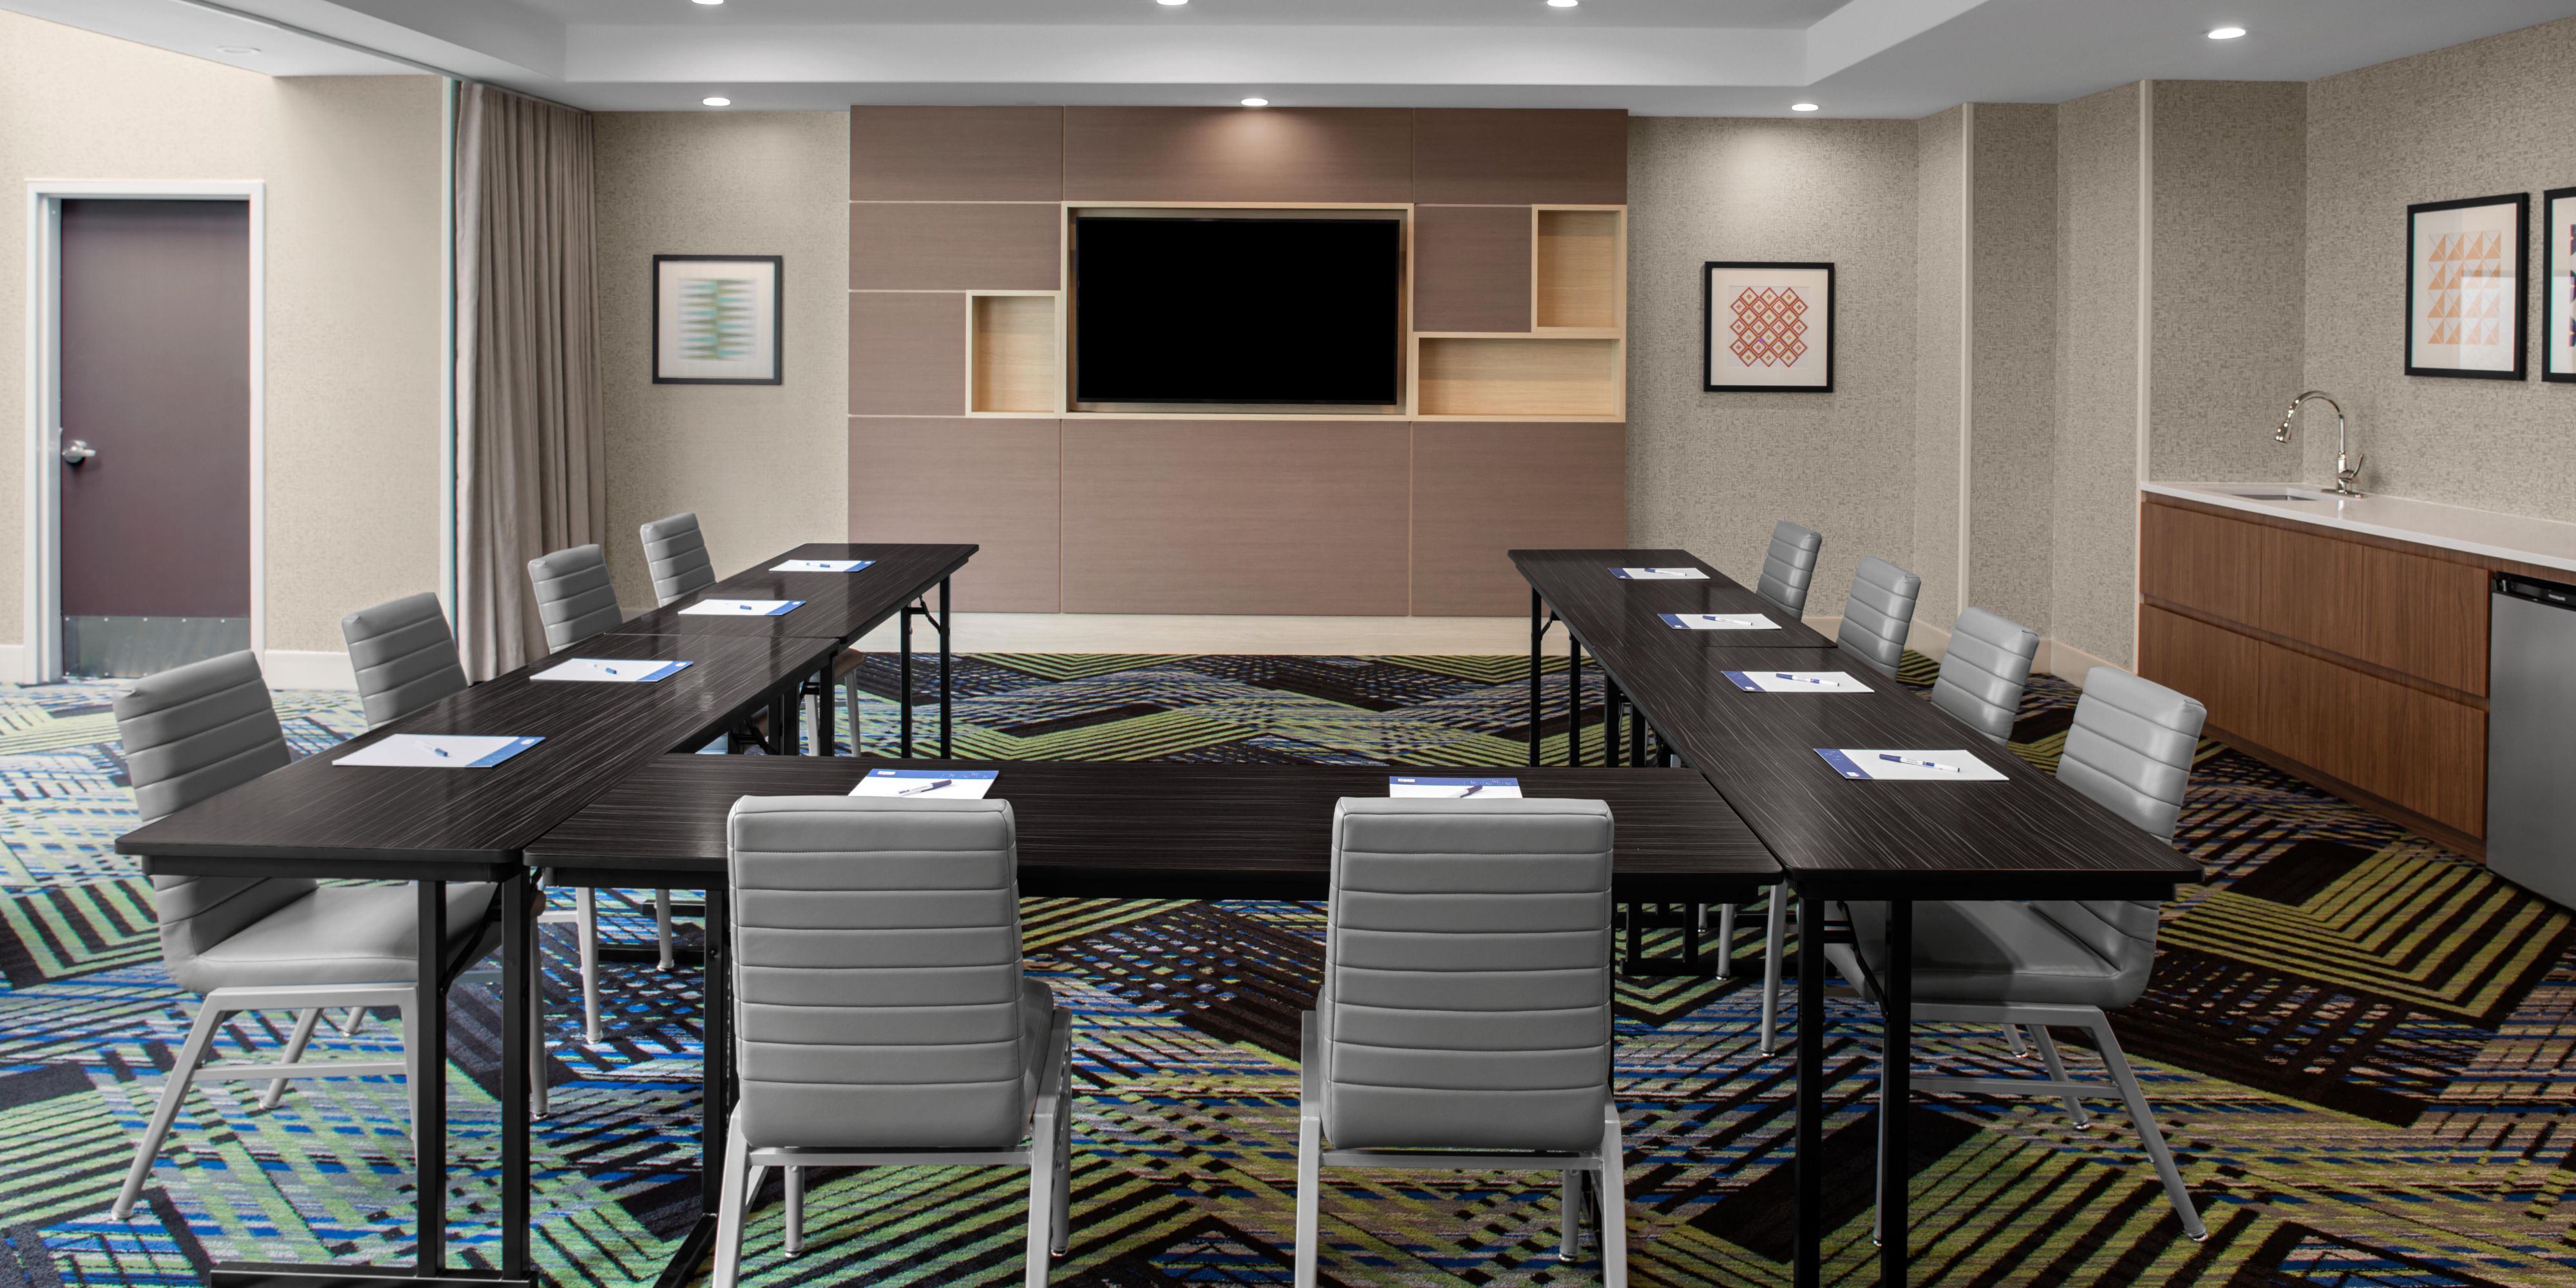 Our two spacious meeting rooms and extended outdoor terrace  where your meeting or special event is made reality & easy!  Everything you need to meet the way you like. Our hotel makes an ideal meeting spot near LGA Airport.  